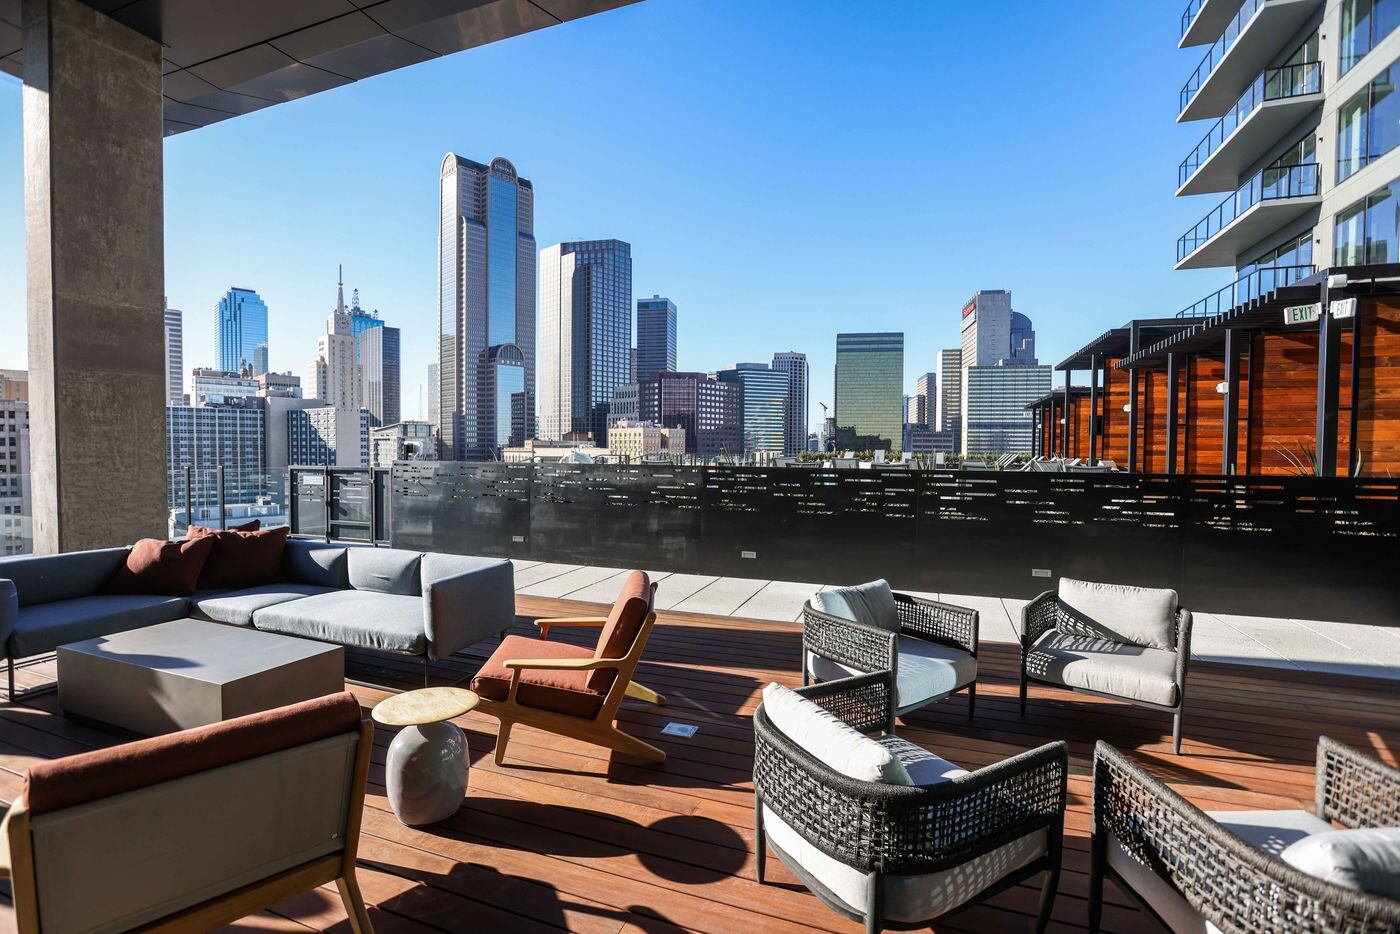 Outdoor lounge area on the eighth floor of  the new East Quarter Residences tower in downtown Dallas. (Lola Gomez/The Dallas Morning News)